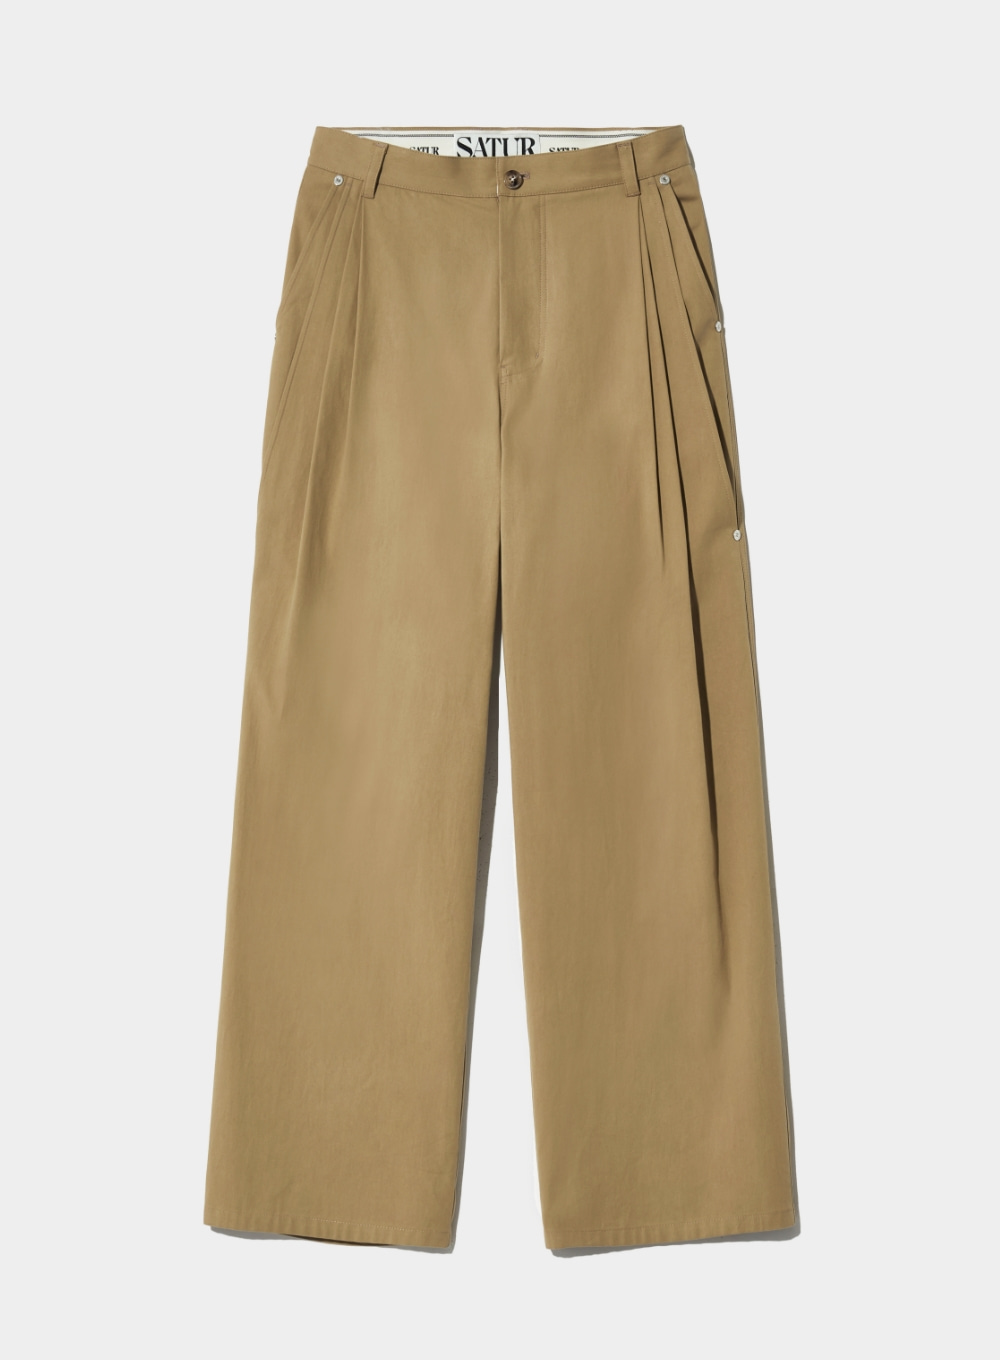 Vinales 2-Tuck Wide Chino Pants - Classic Beige